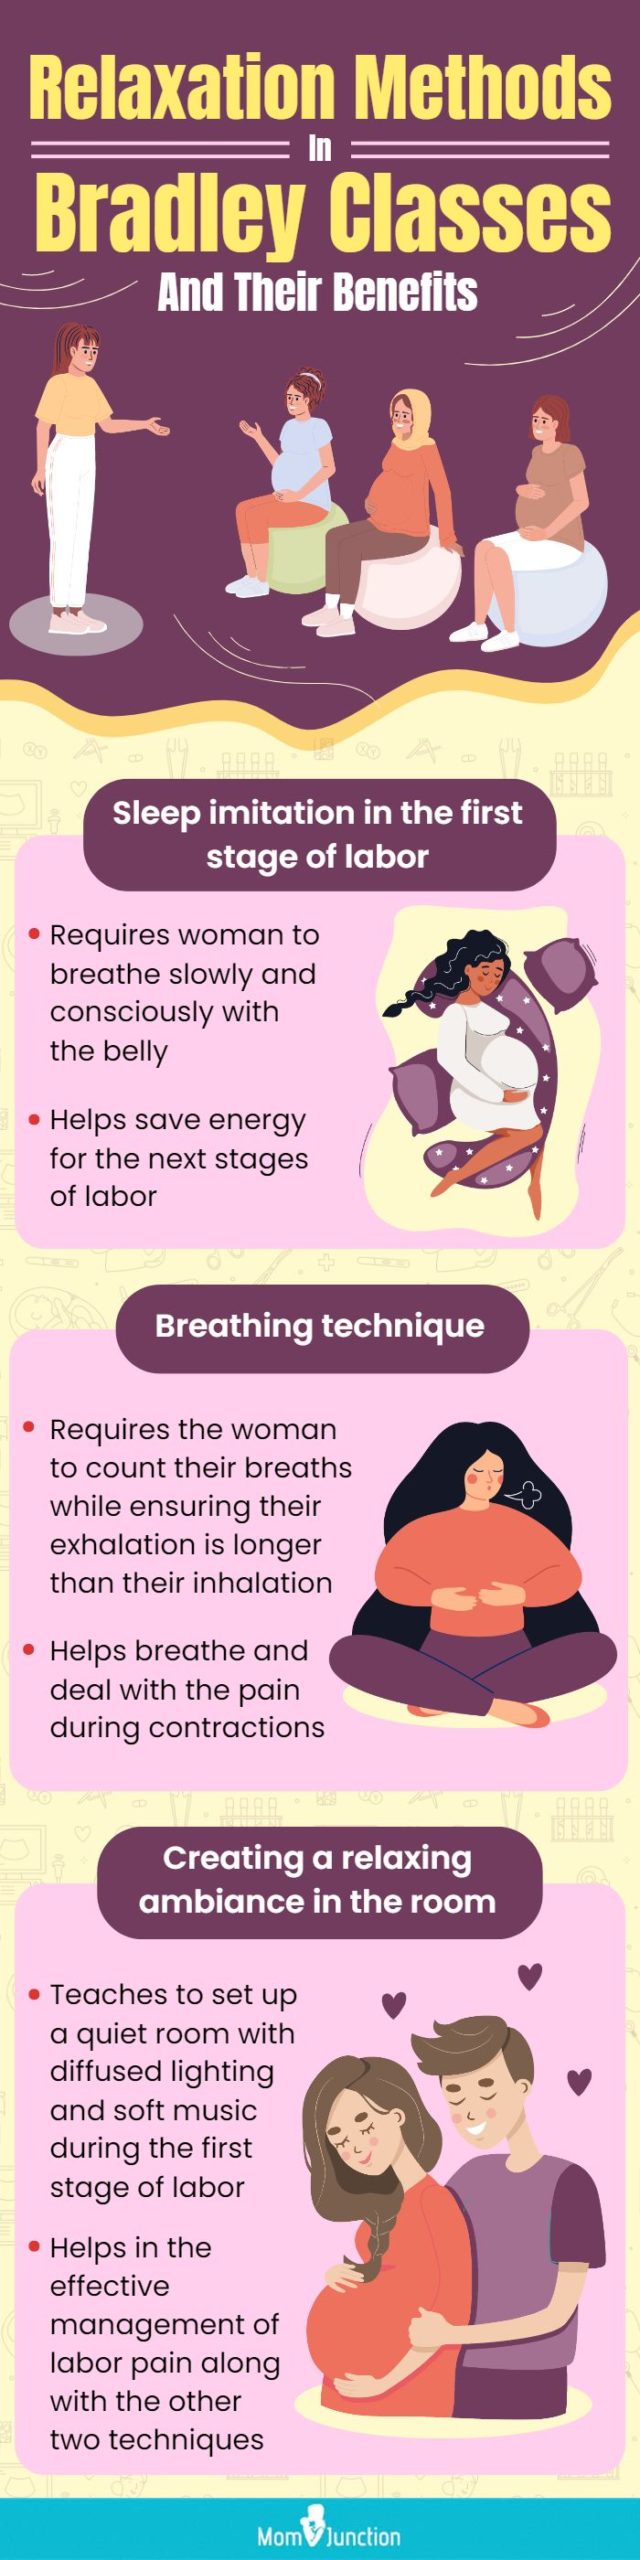 relaxation methods in bradley classes and their benefits (infographic)